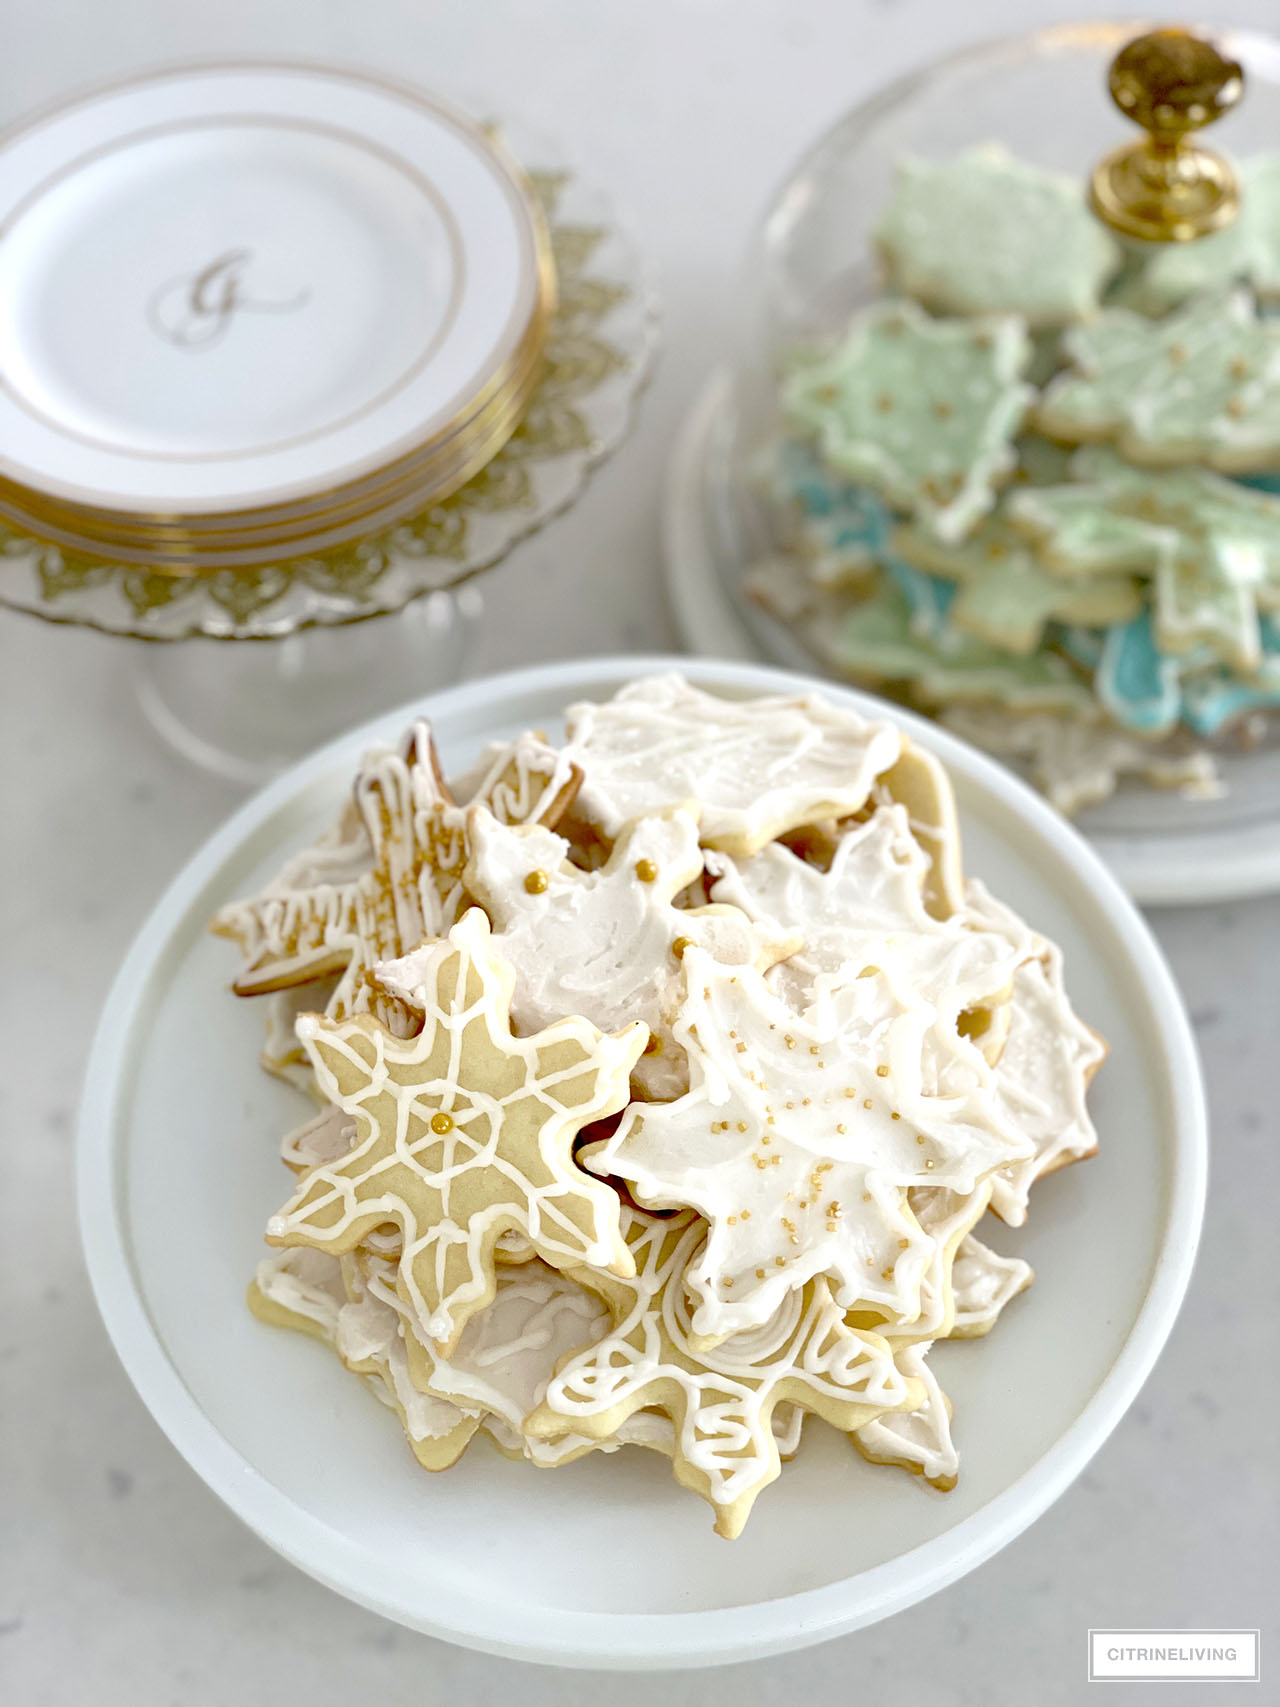 Cakes stands in white, glass and gold hold elegant and beautiful frosted Christmas sugar cookies.